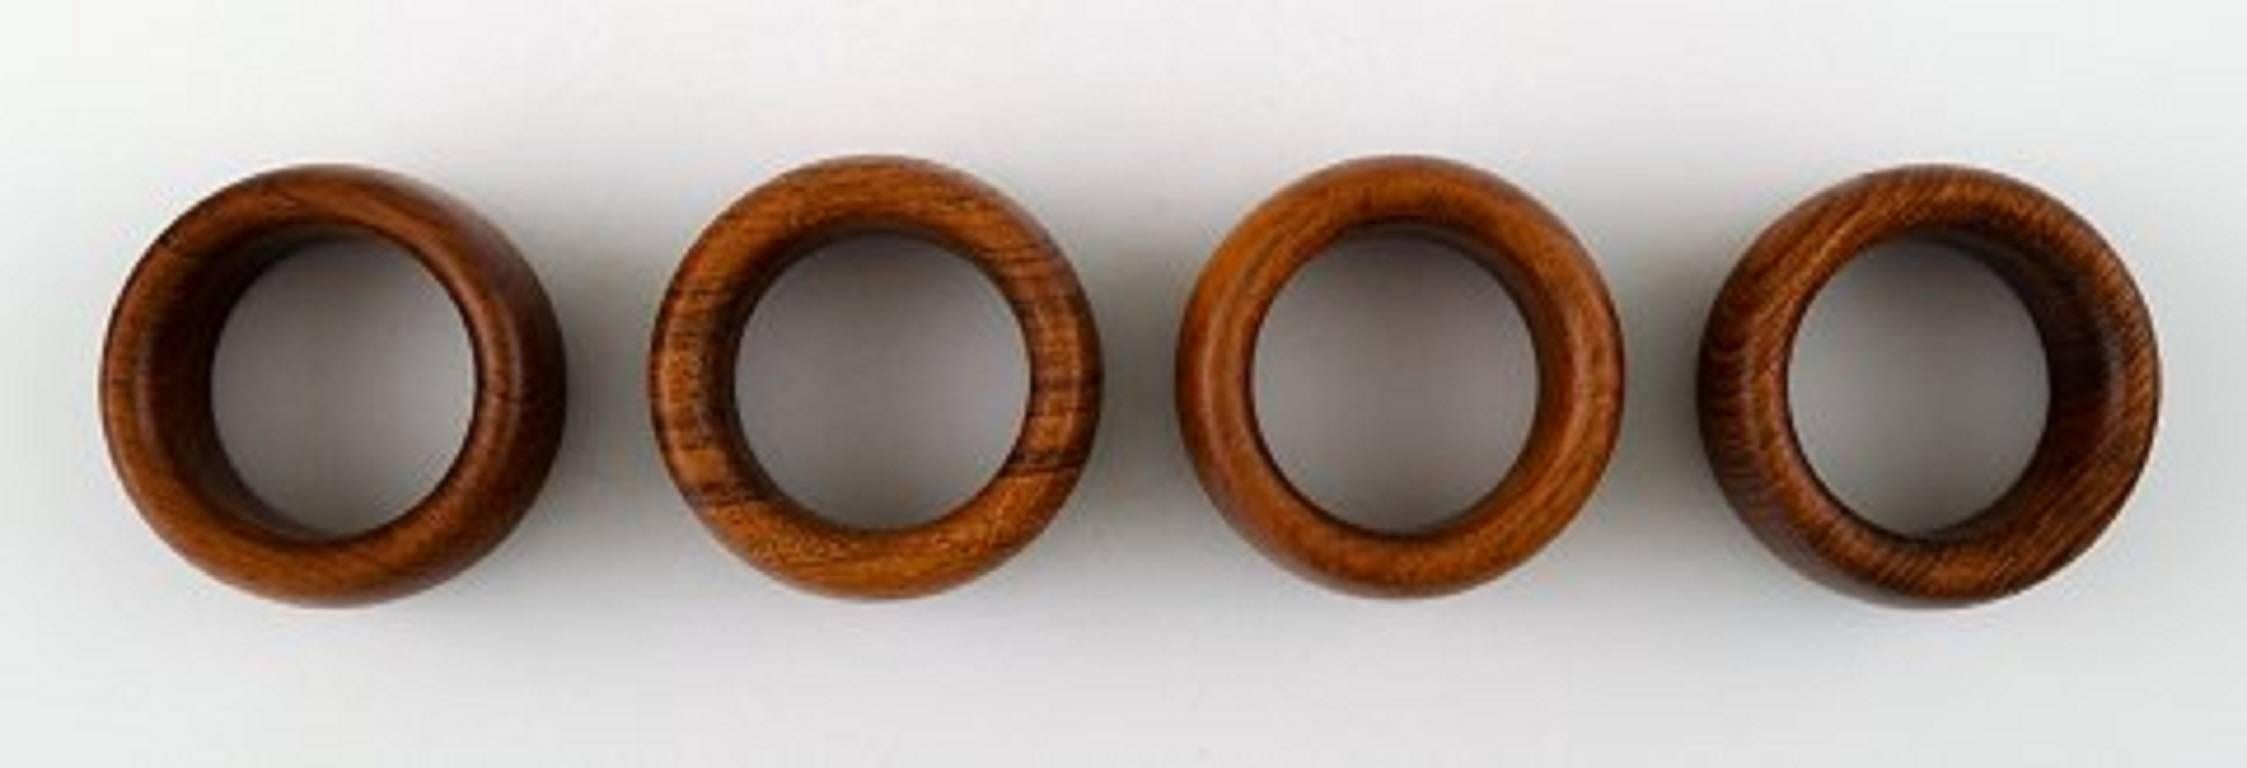 Kay Bojesen four napkin rings in teak.

Danish design 1950s.

In perfect condition.

Measures: 5 cm. x 2 cm.

Indistinctly stamped.